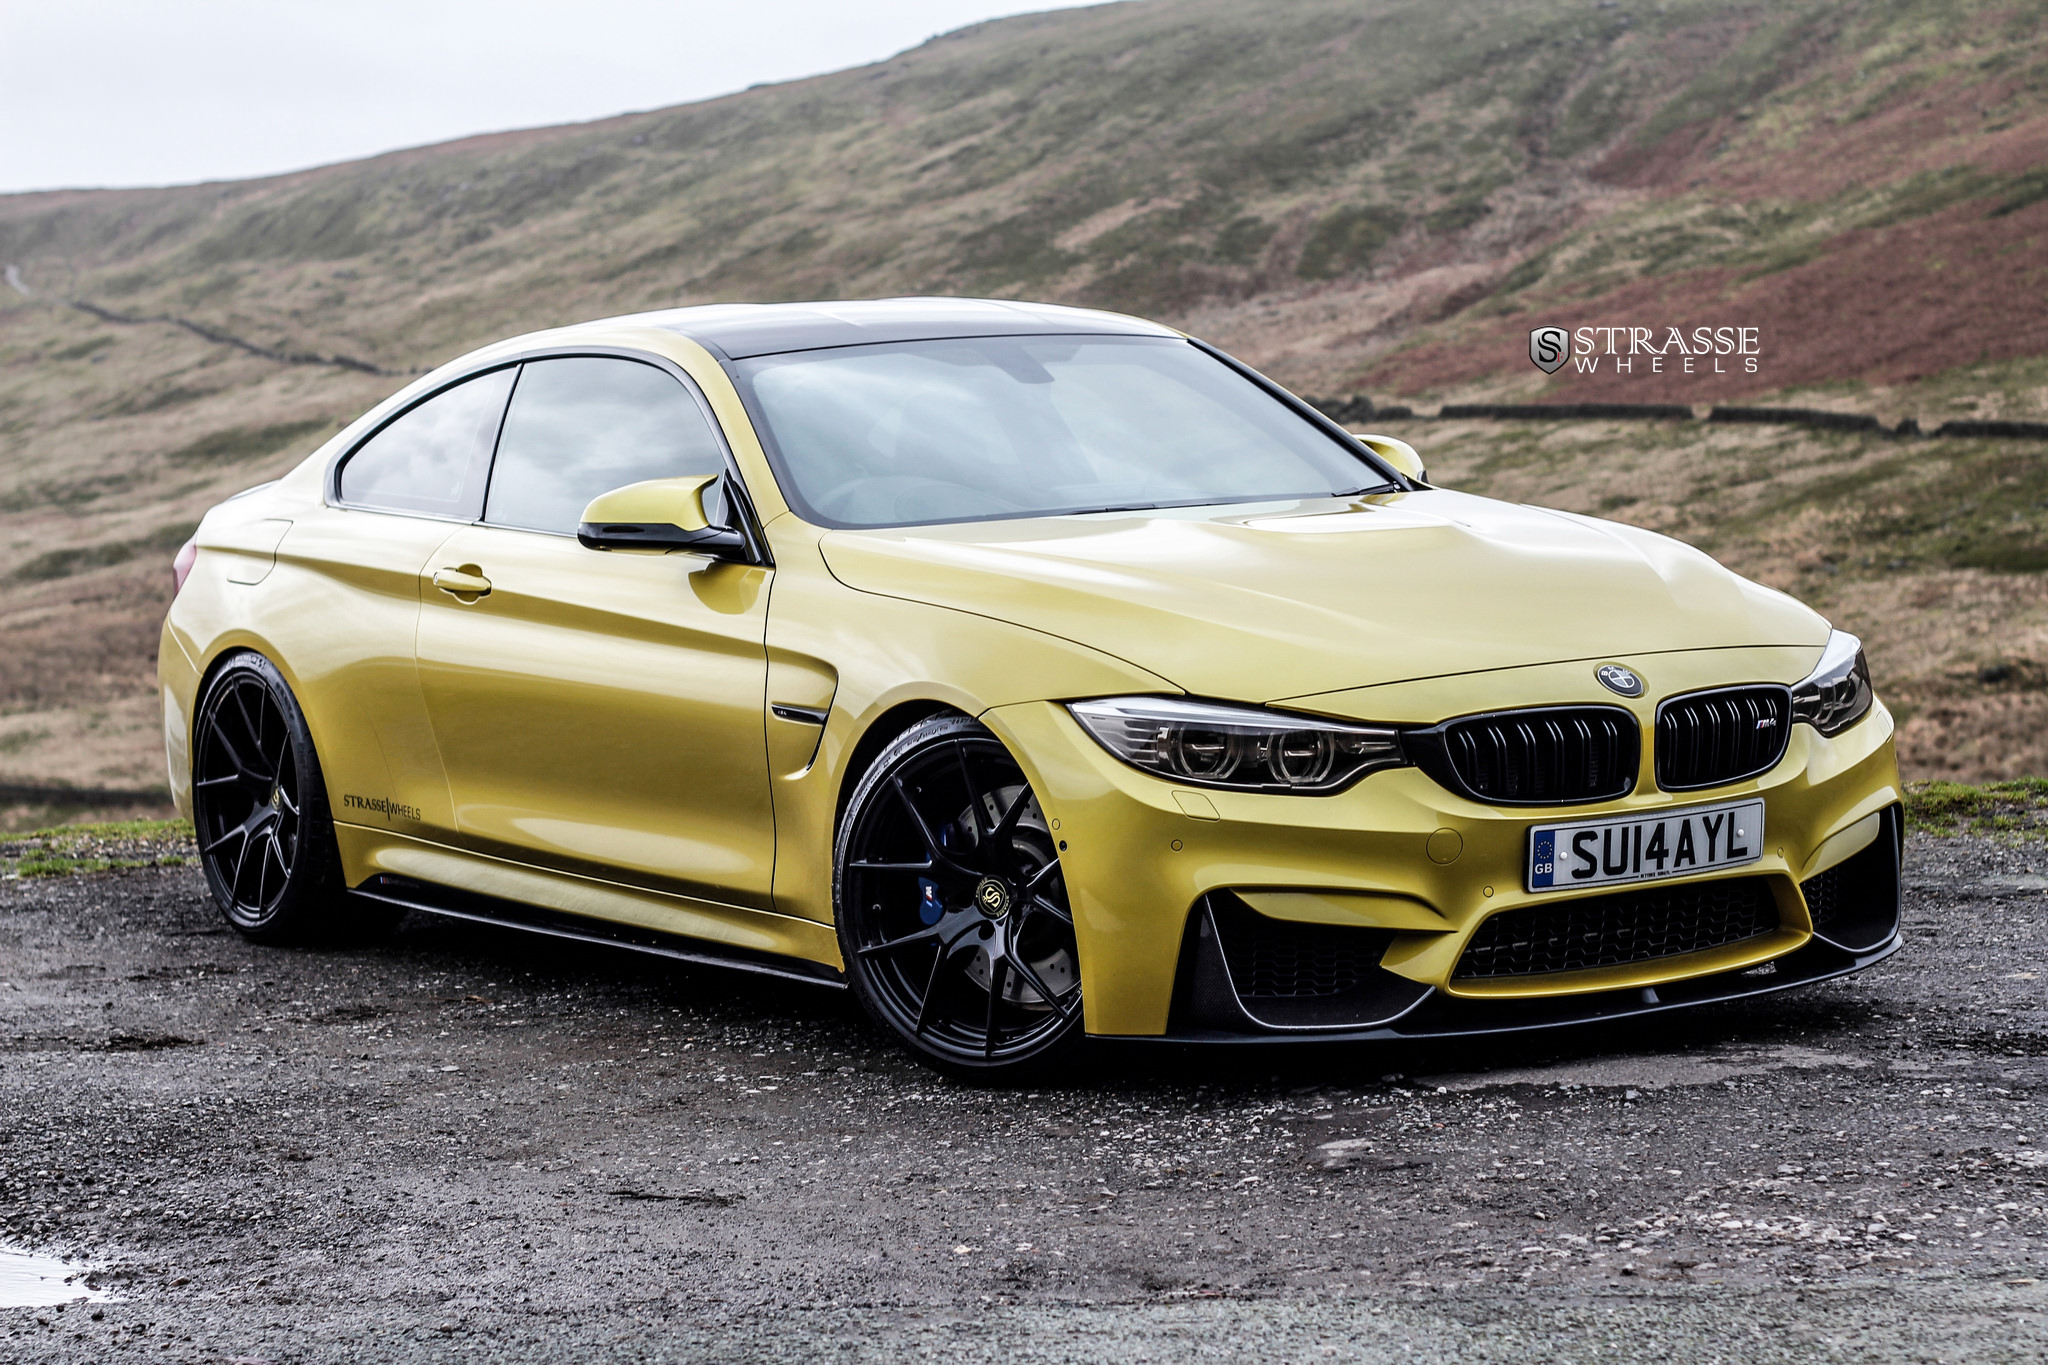 MPPSOCIETY Modified Cars Sullyrityres BMW M4 Strasse Forged Wheels 01